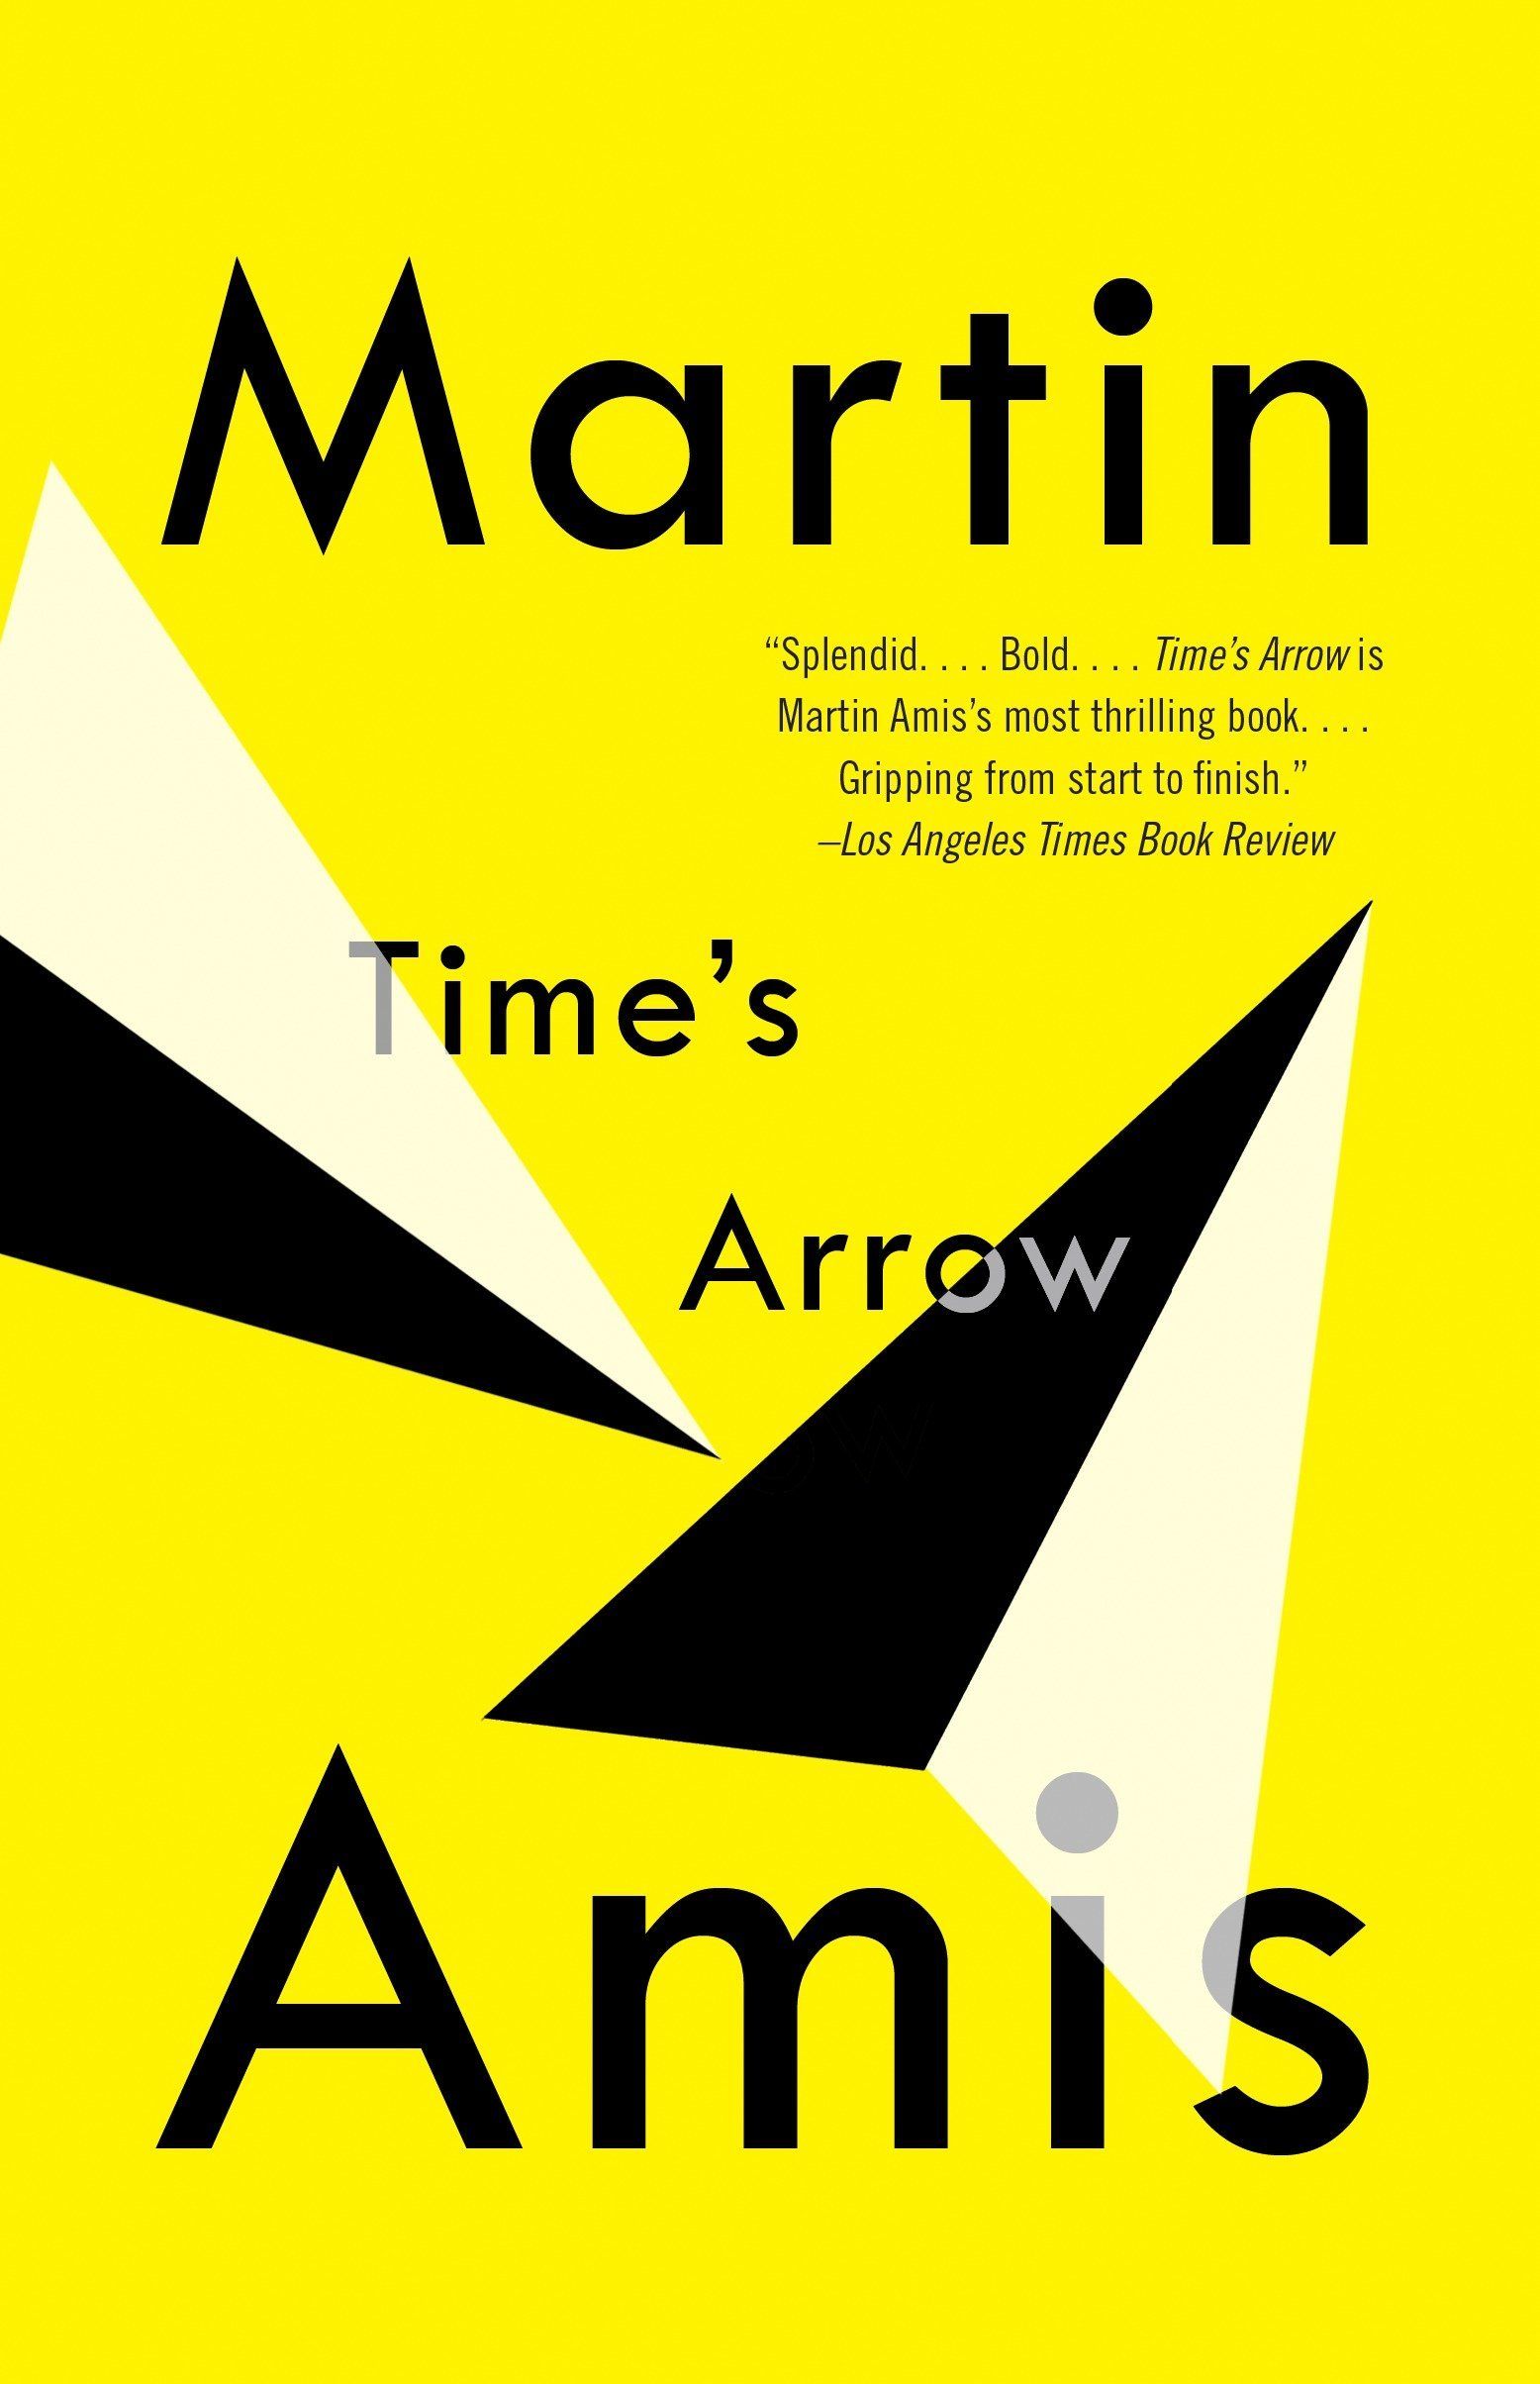 cover of time's arrow by martin amis